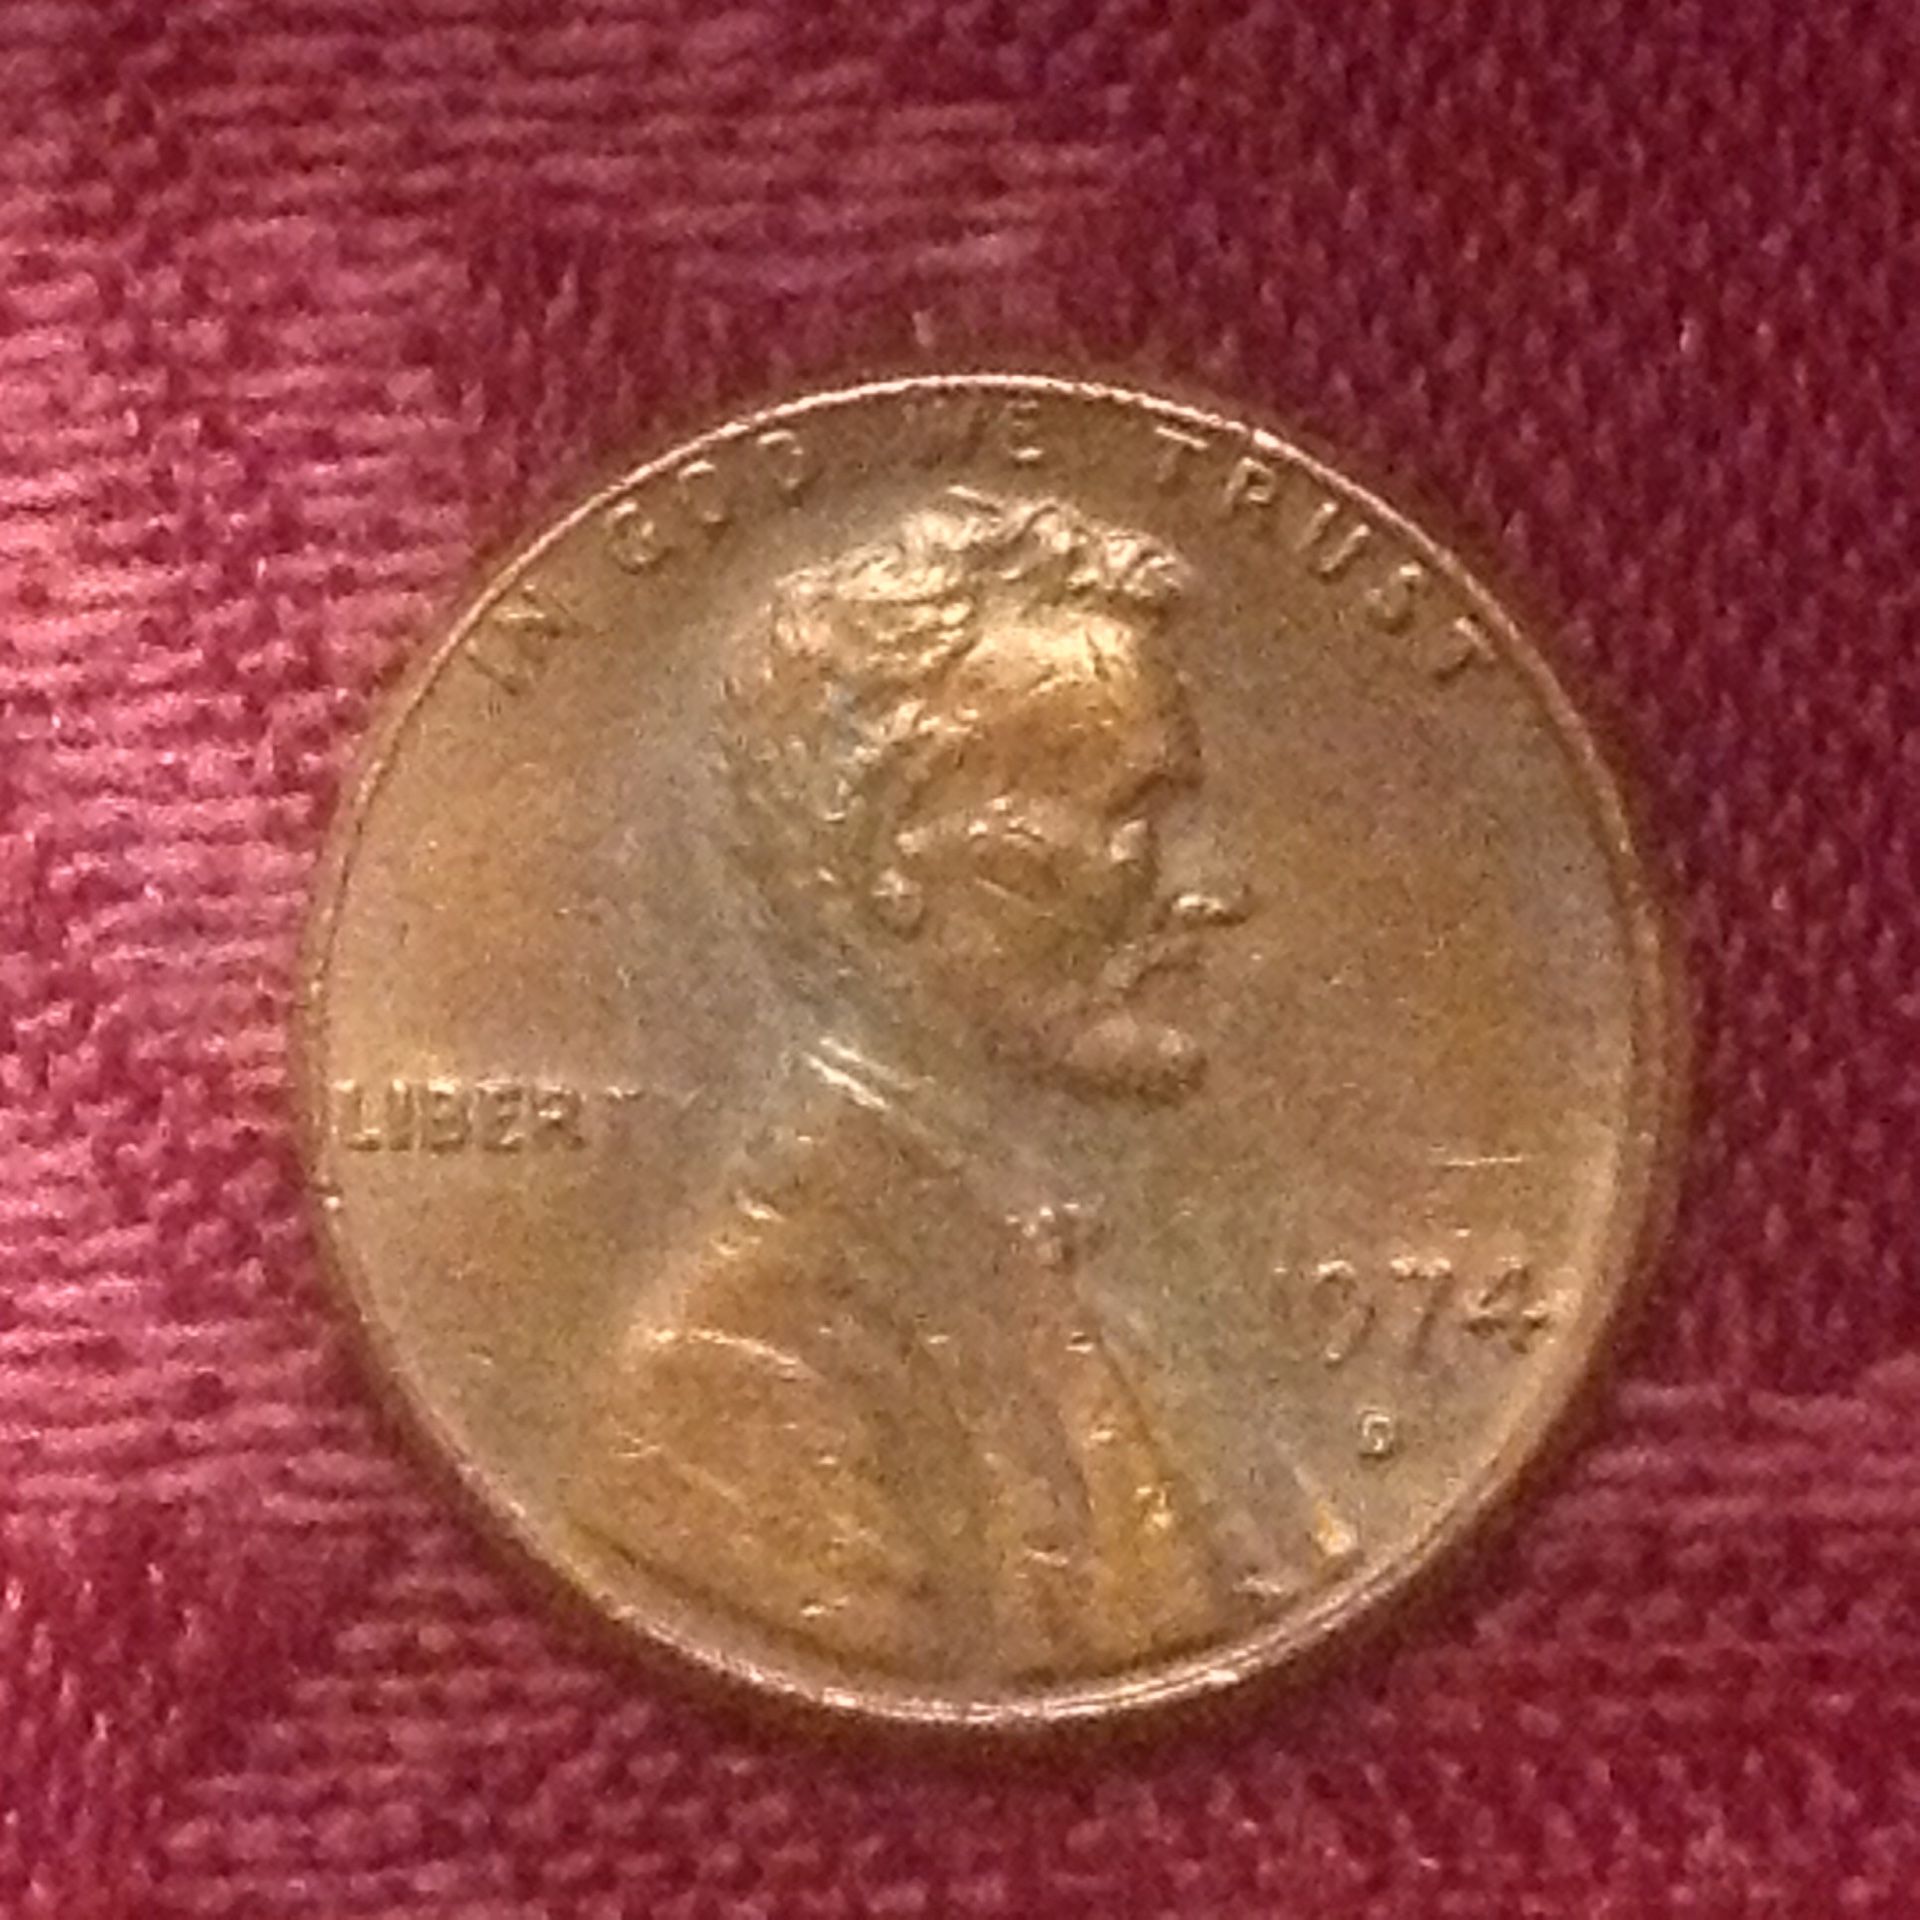 1974 D error very collectible penny